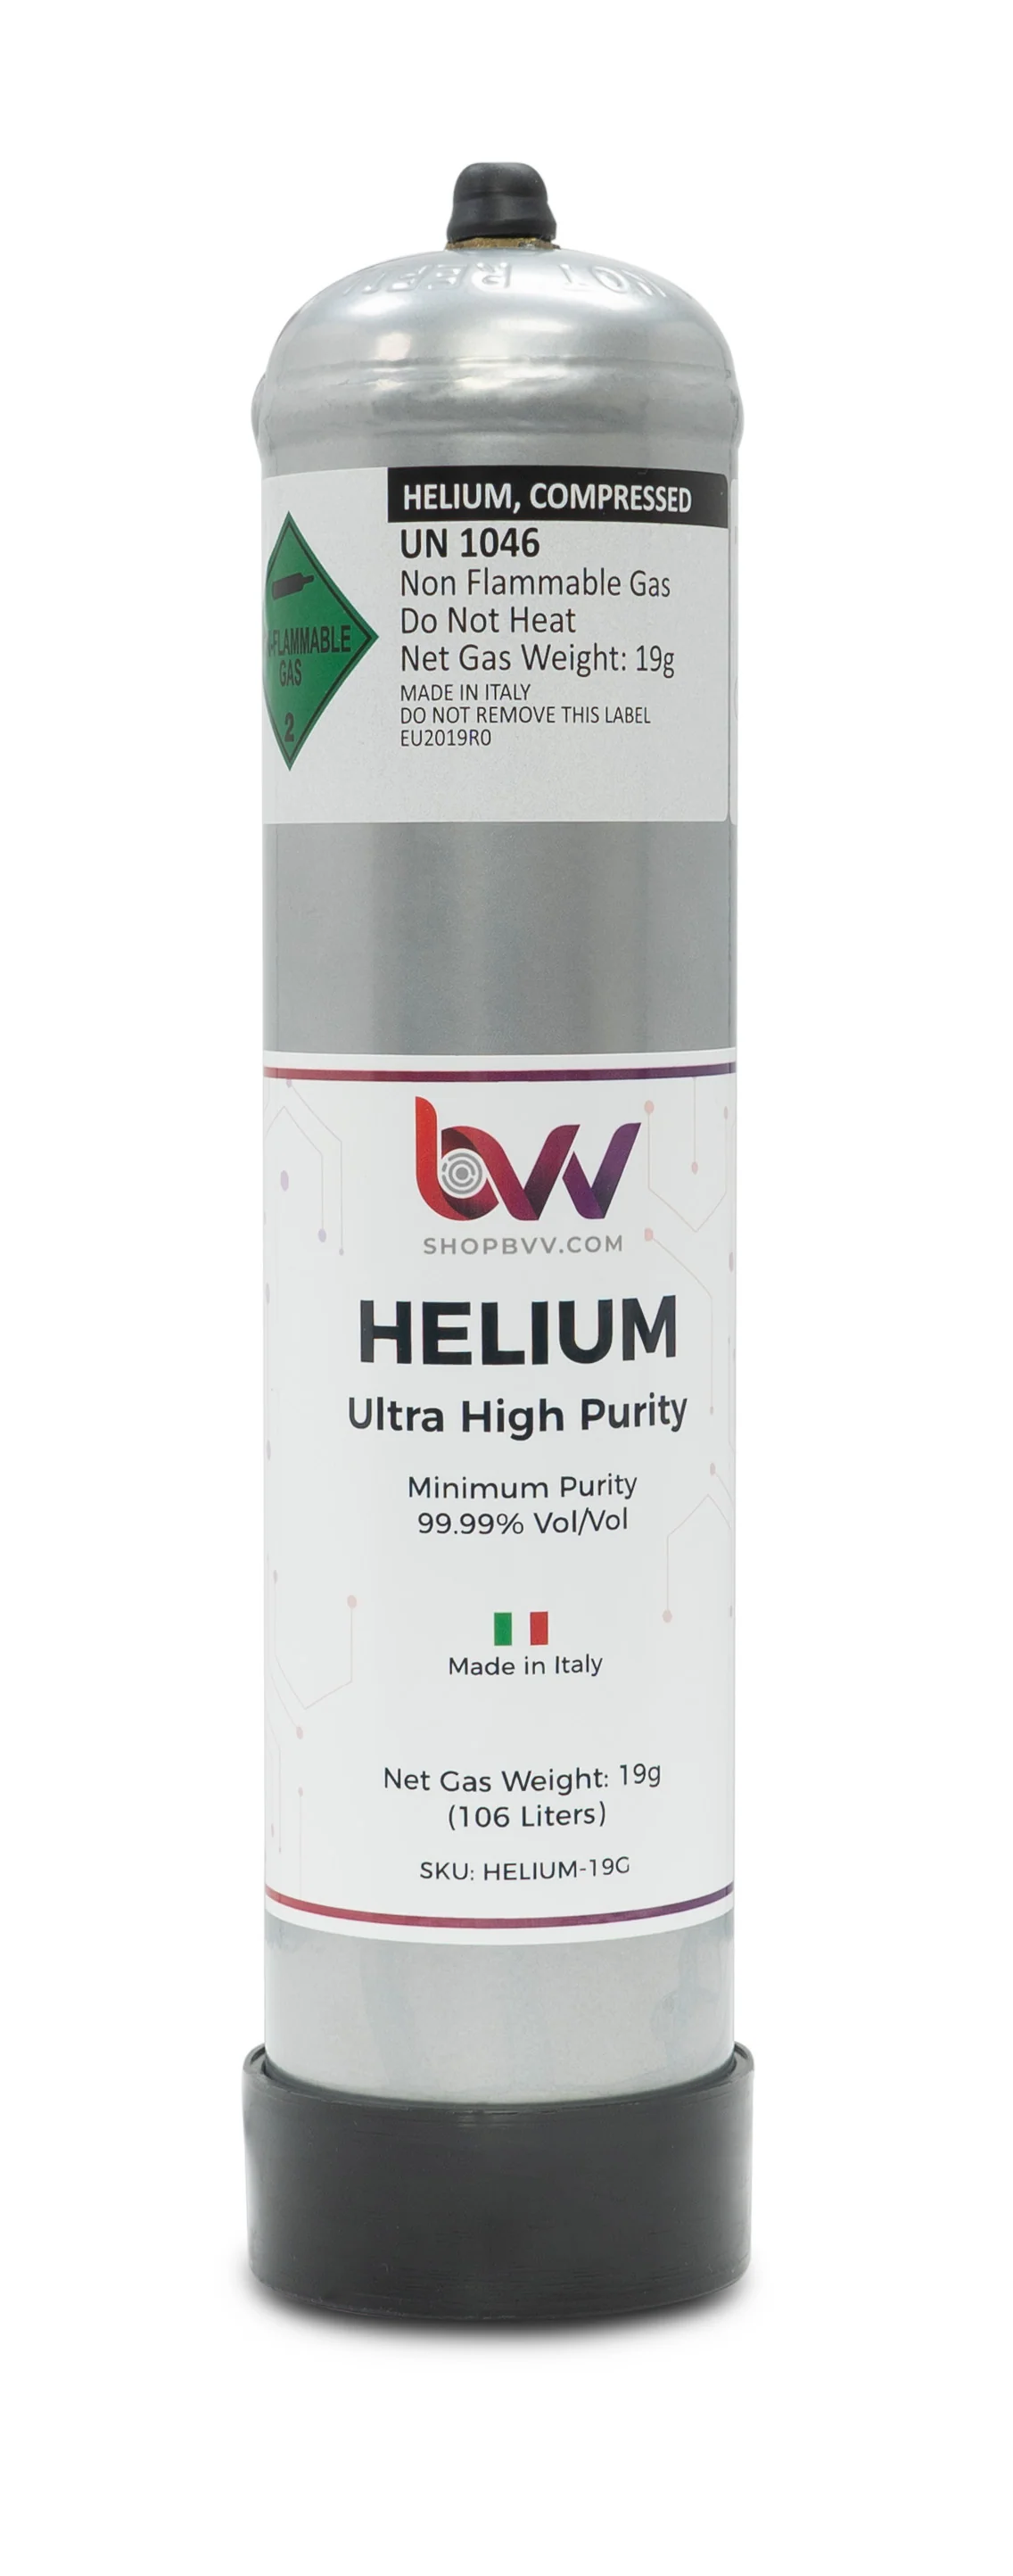 High Purity Helium Tank 99.99% (19g / 106 liters) Questions & Answers